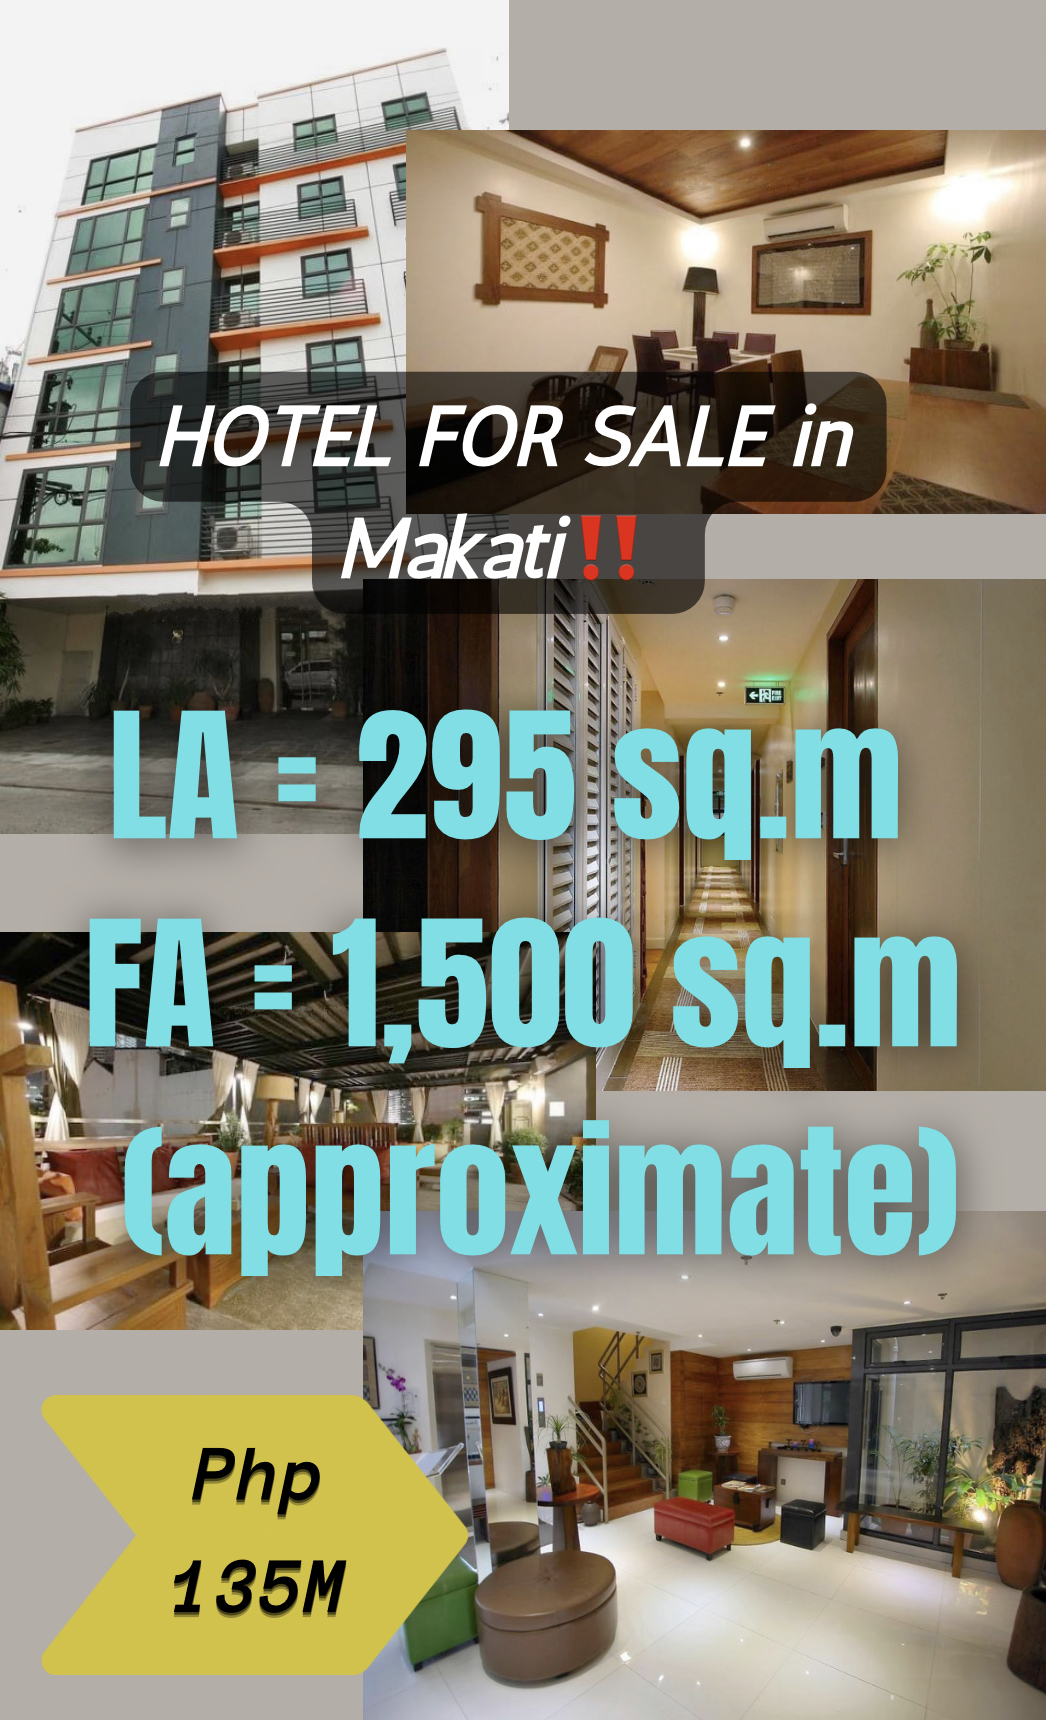 HOTEL FOR SALE with lobby and back office  in Makati‼️